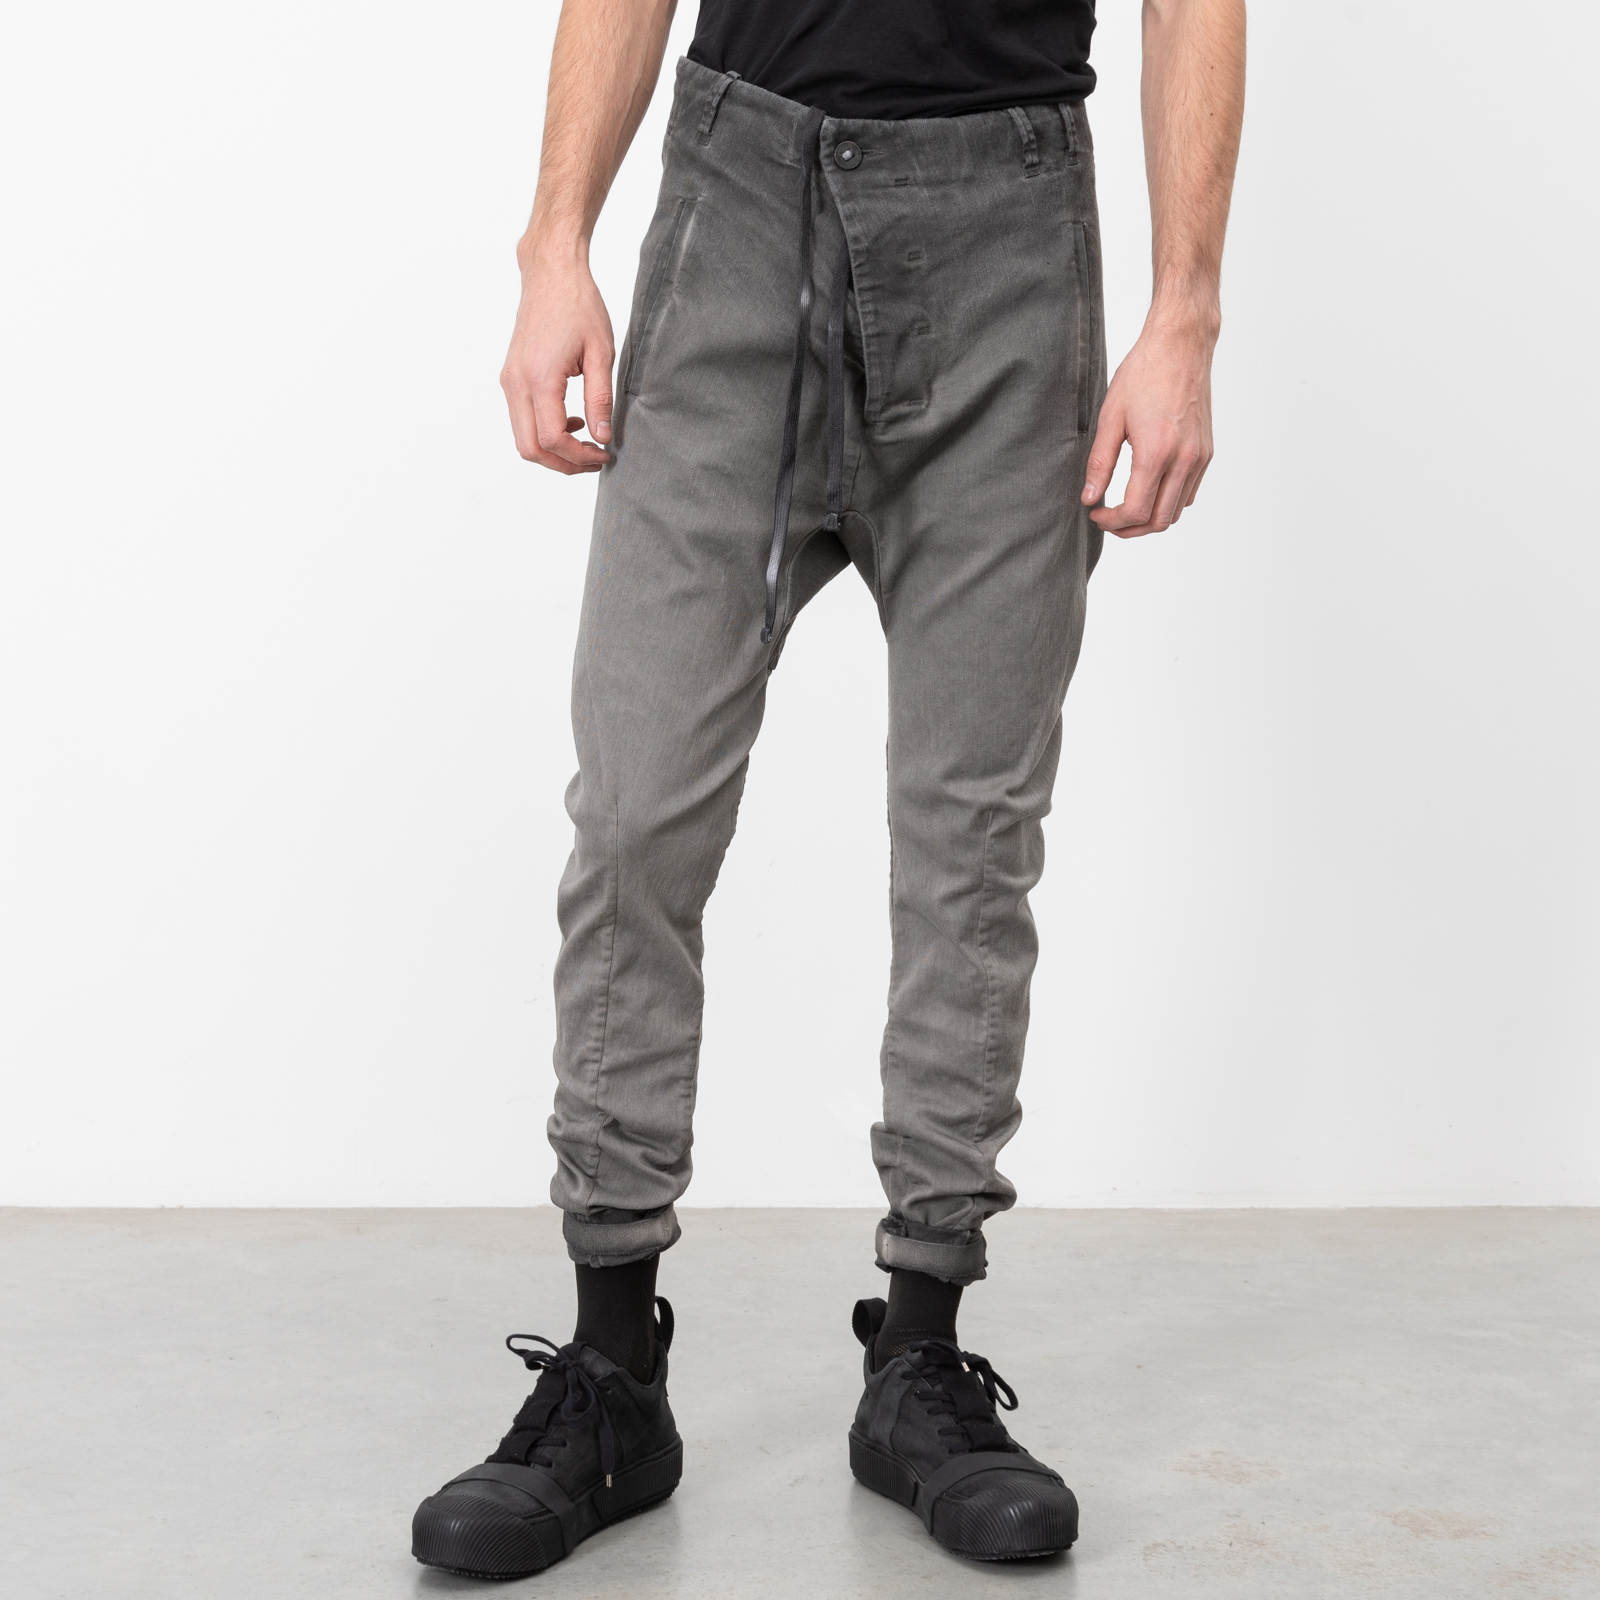 FADED DARK GREY DBL OBJECT DYED P11 PANTS|wolfensson